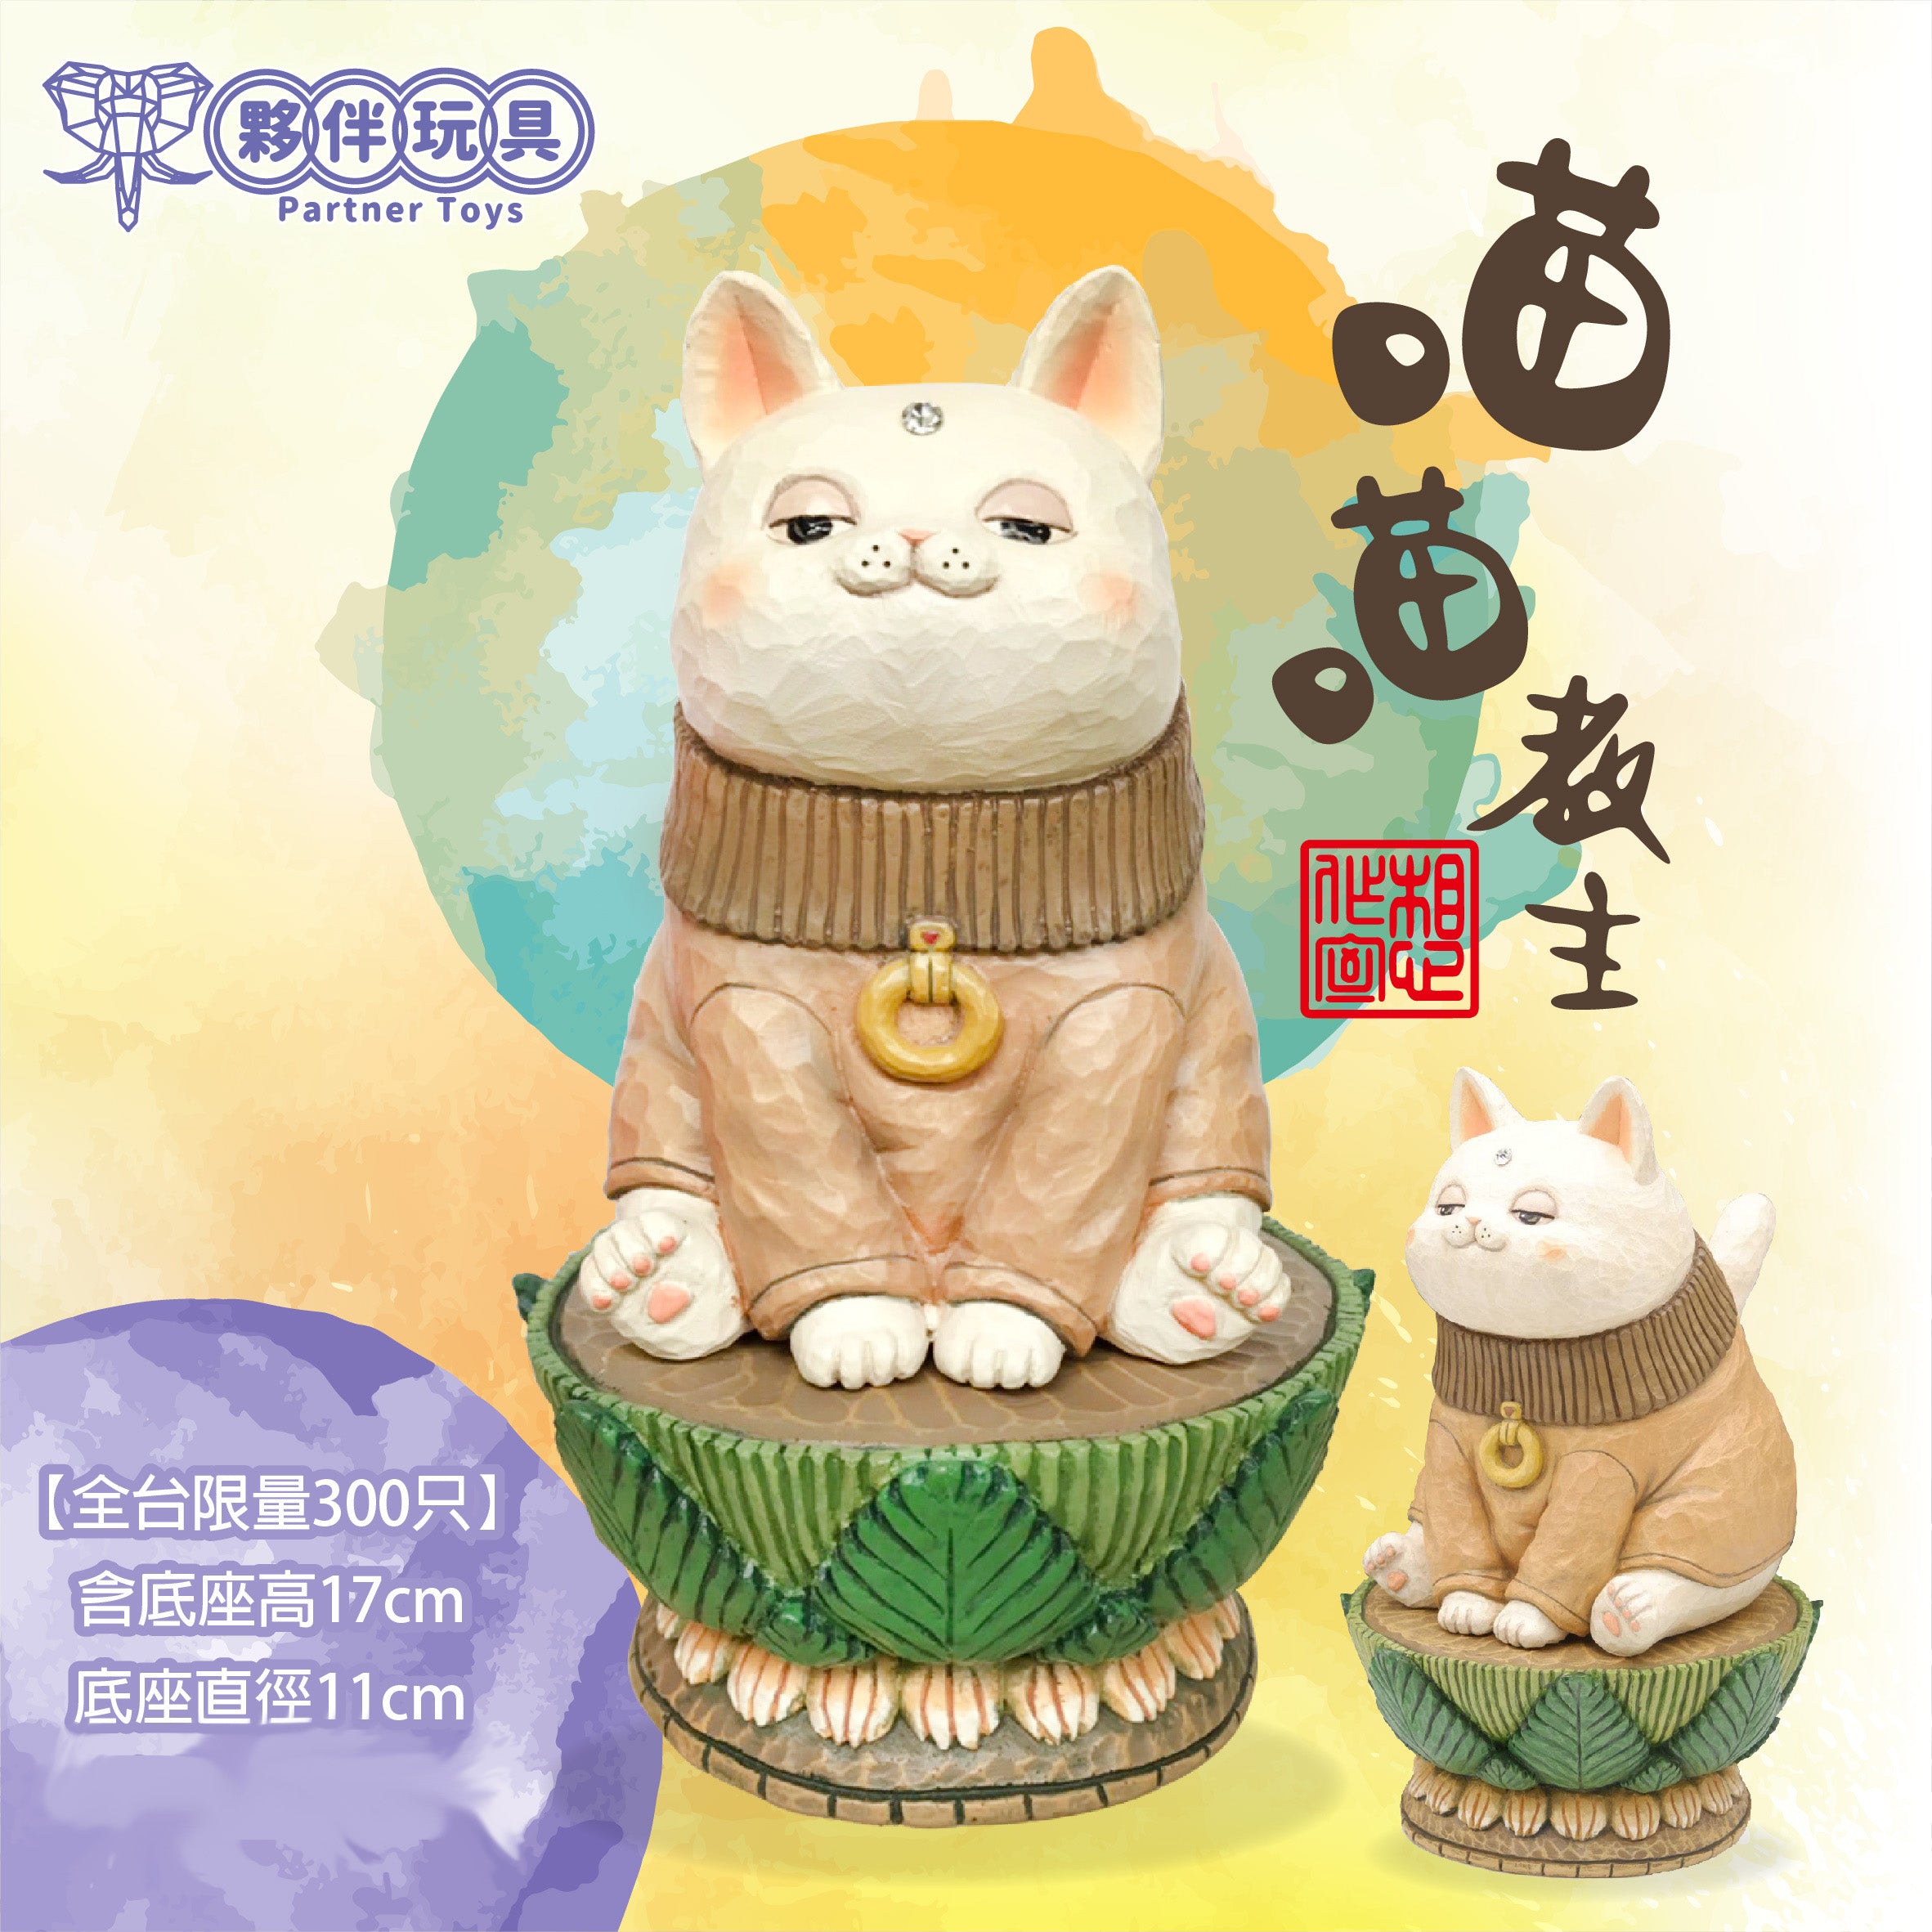 Cat King statue on pedestal with accessories, limited edition wooden base and box by Thinkingues Studio.